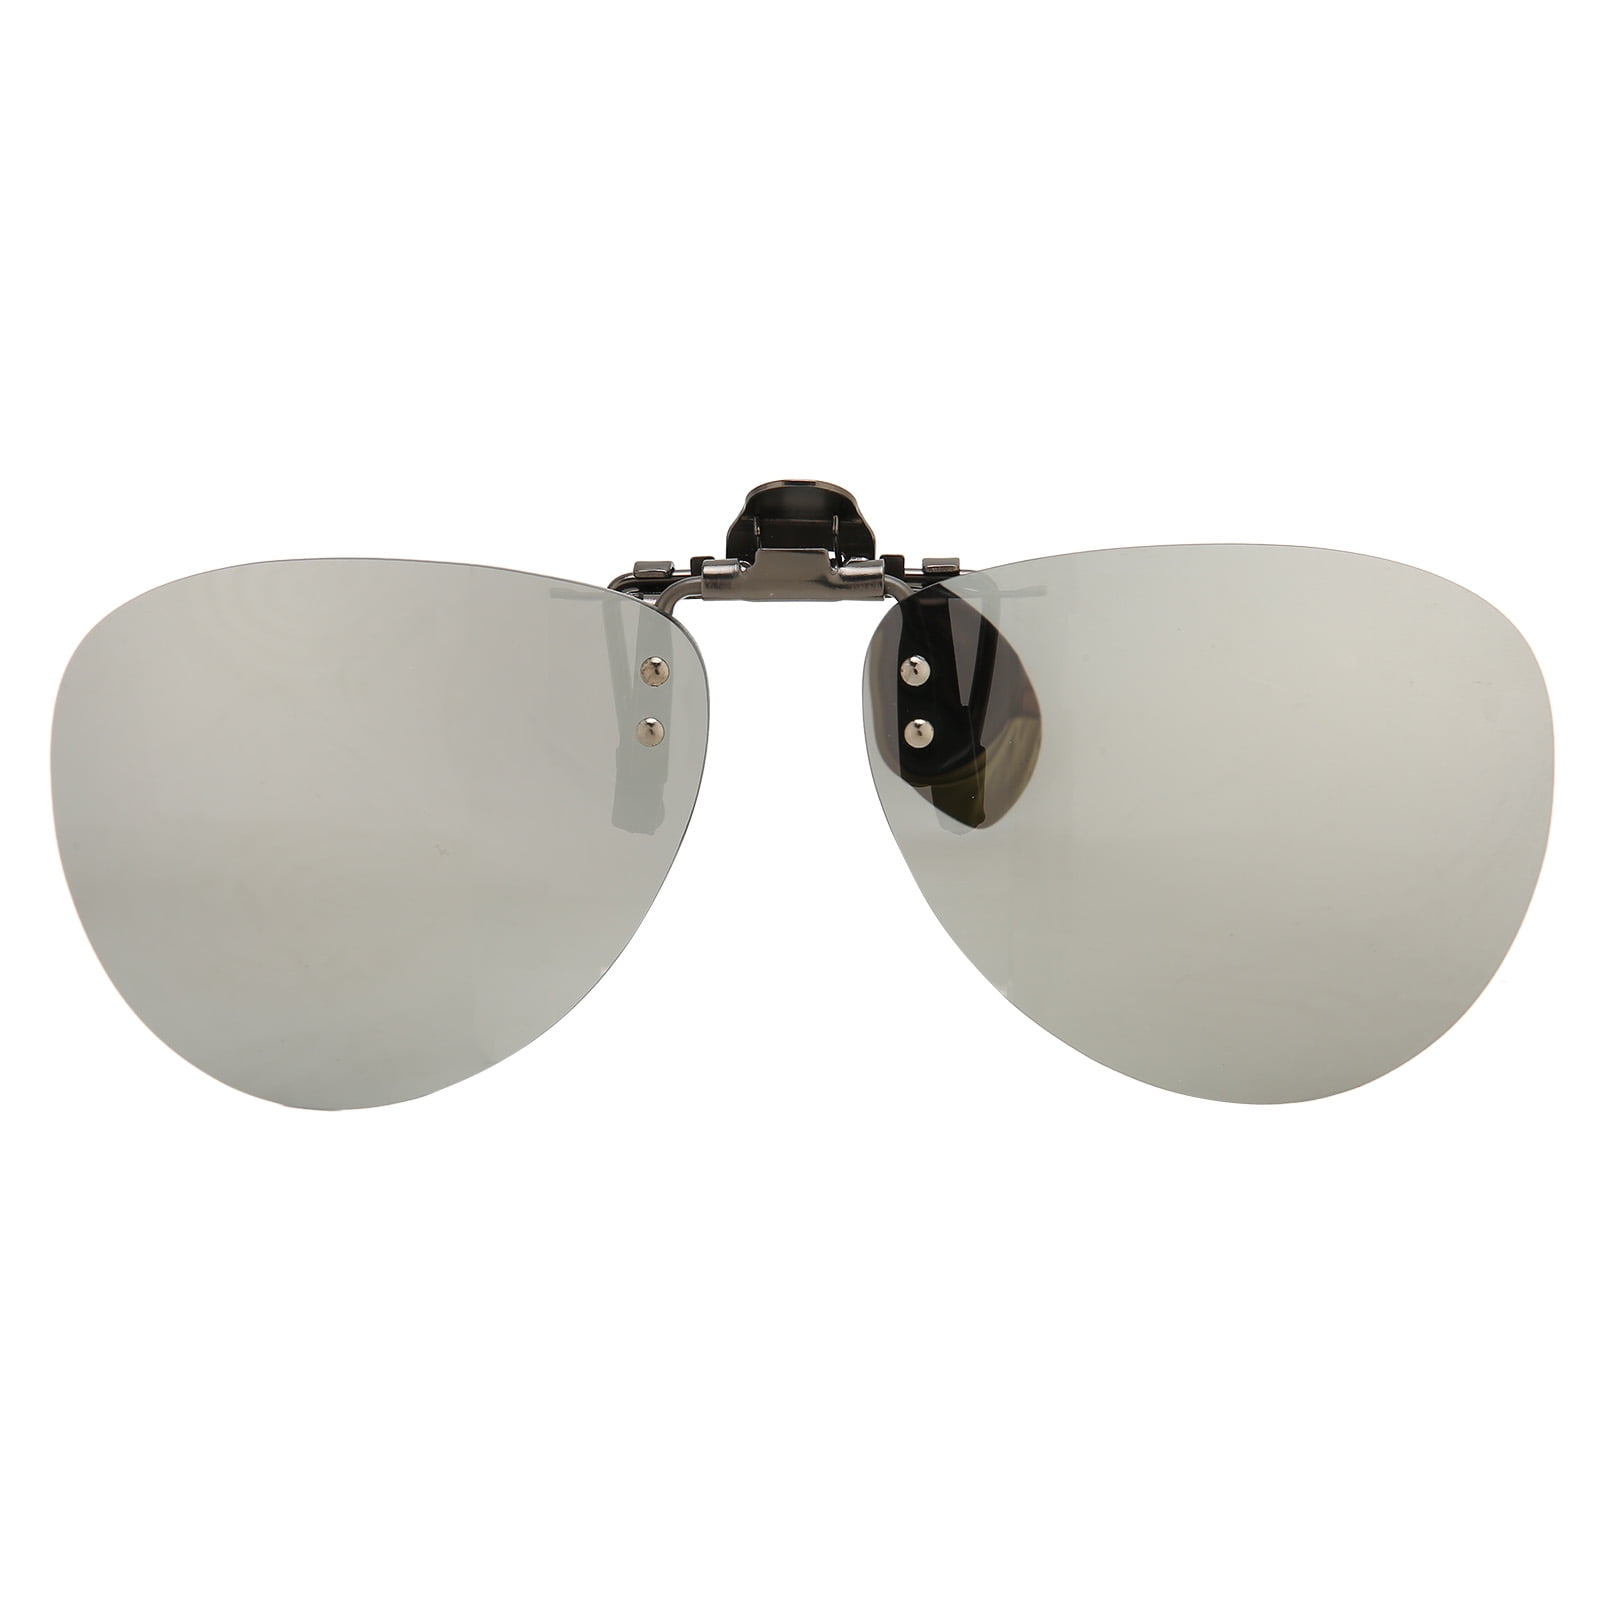 Dark Glasses Clip, Sunglasses Clip UV Protection Scratch Resistant Reduce  For Metal Frame For Cloudy Day - Walmart.com